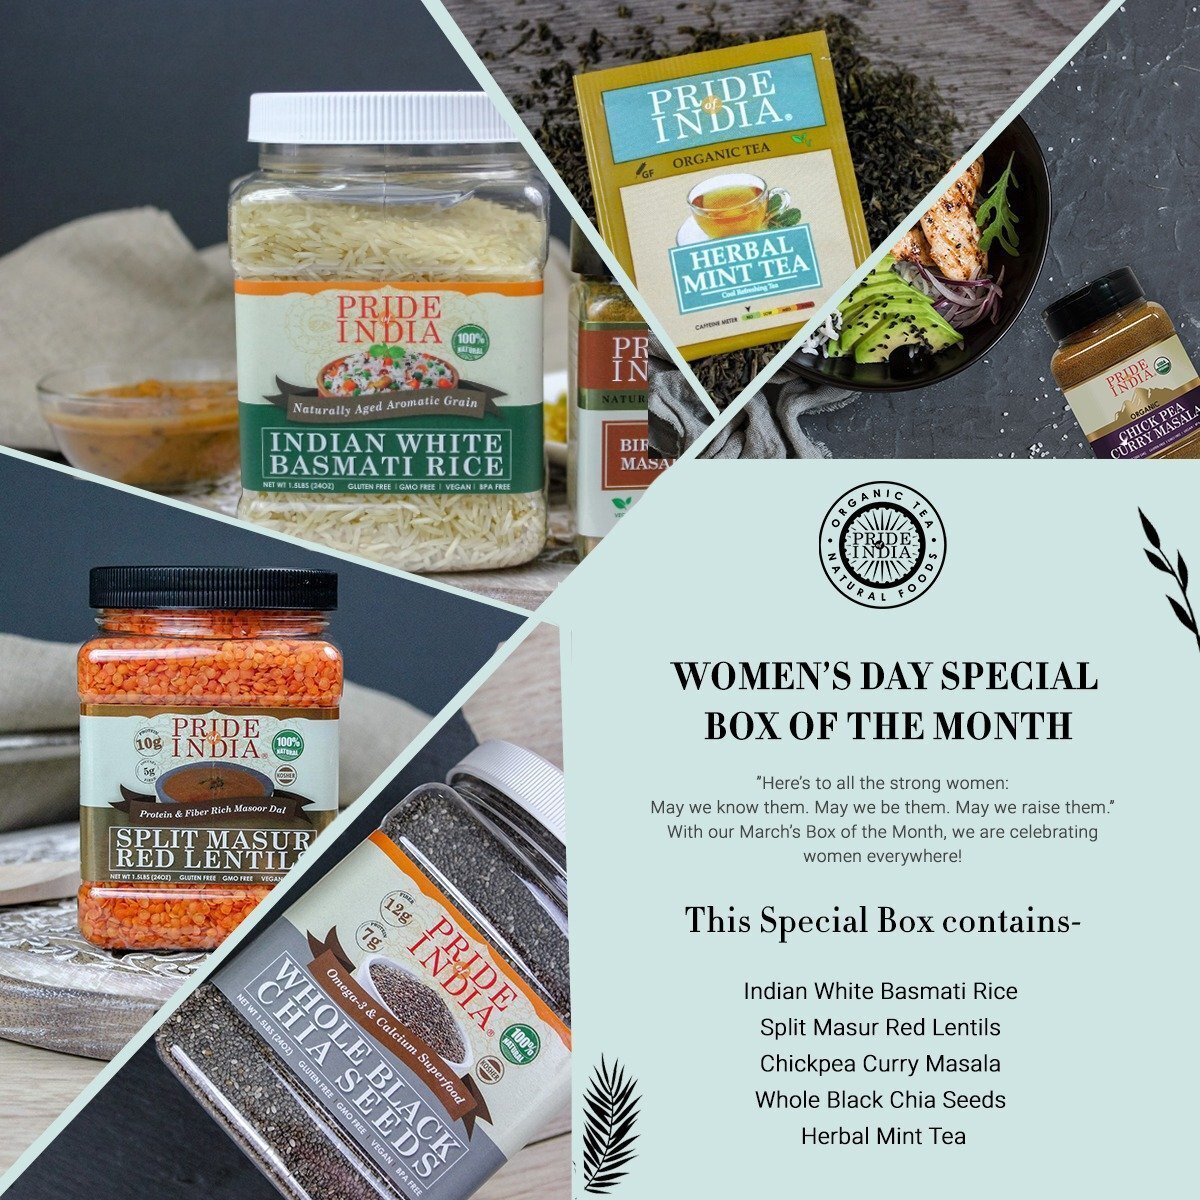 WOMEN’S DAY SPECIAL BOX OF THE MONTH